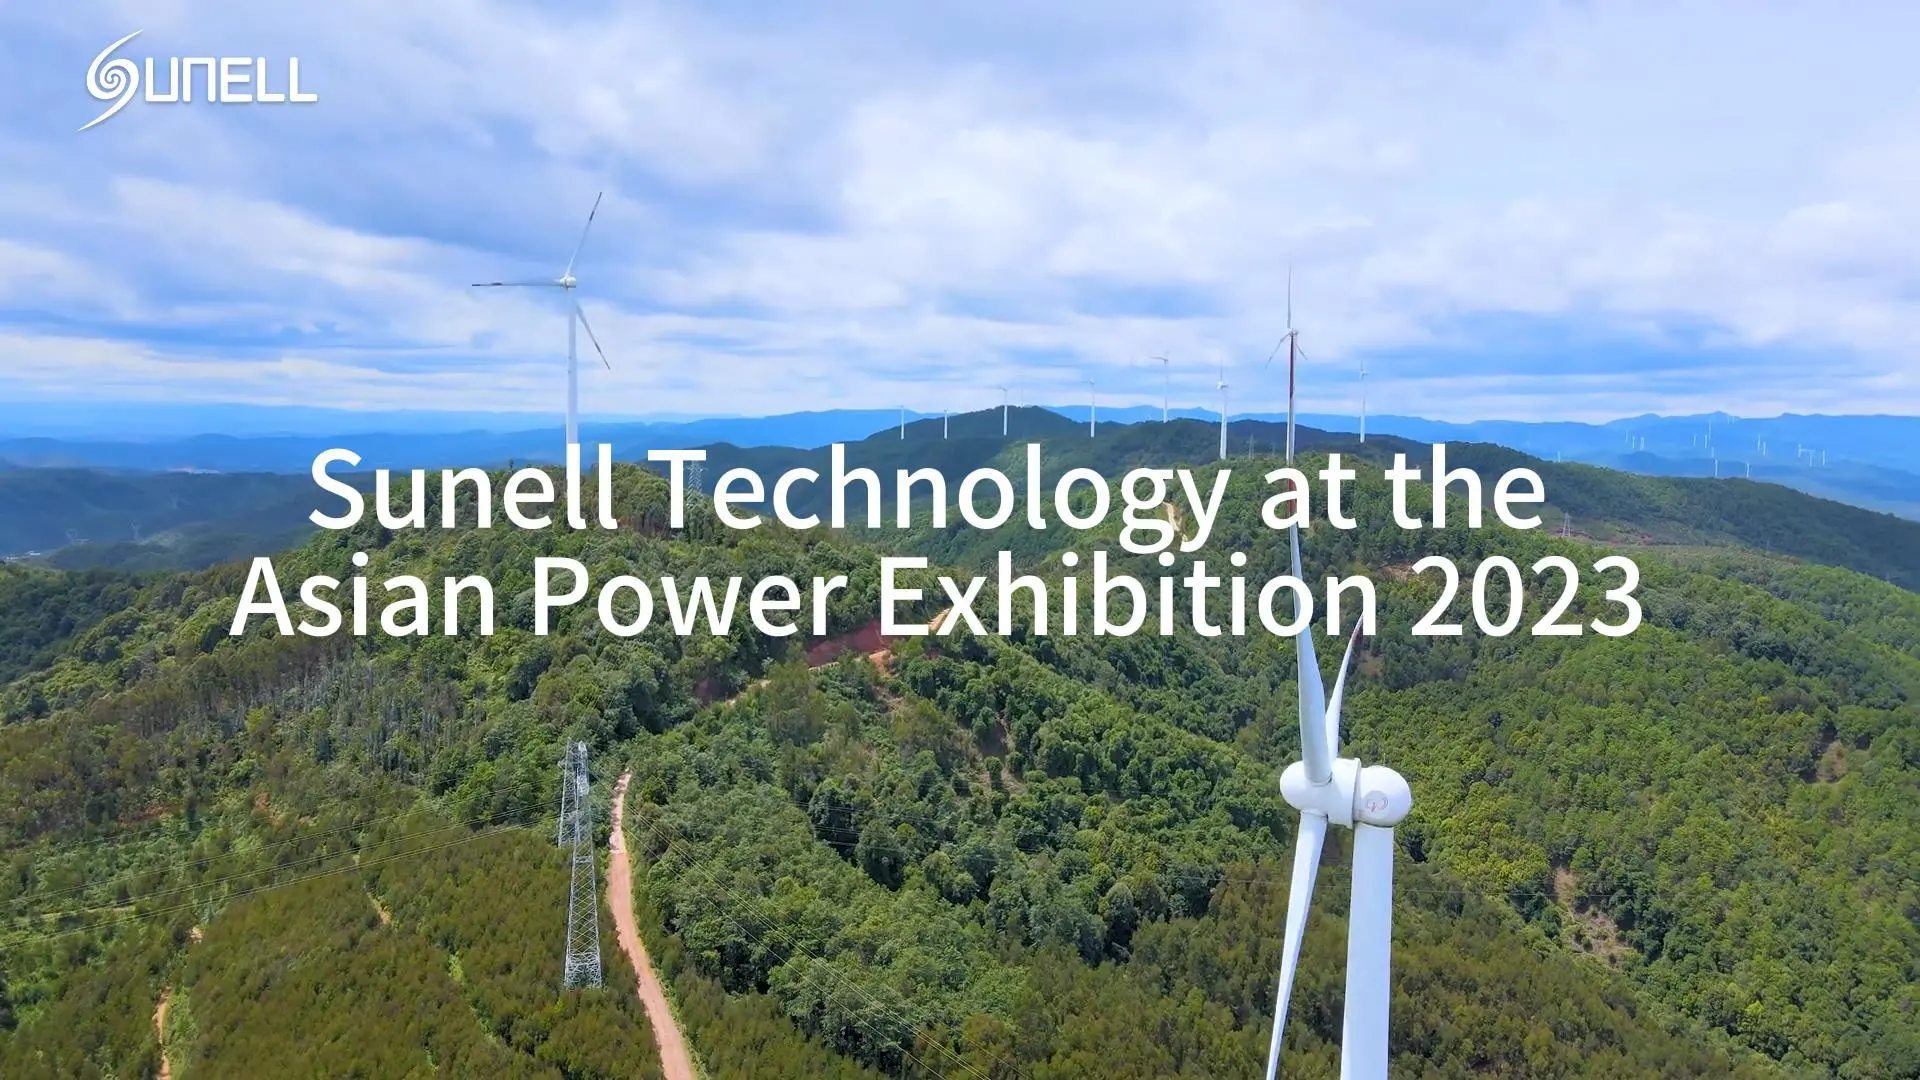 Sunell Technology at the Asian Power Exhibition 2023 - 翻译中...